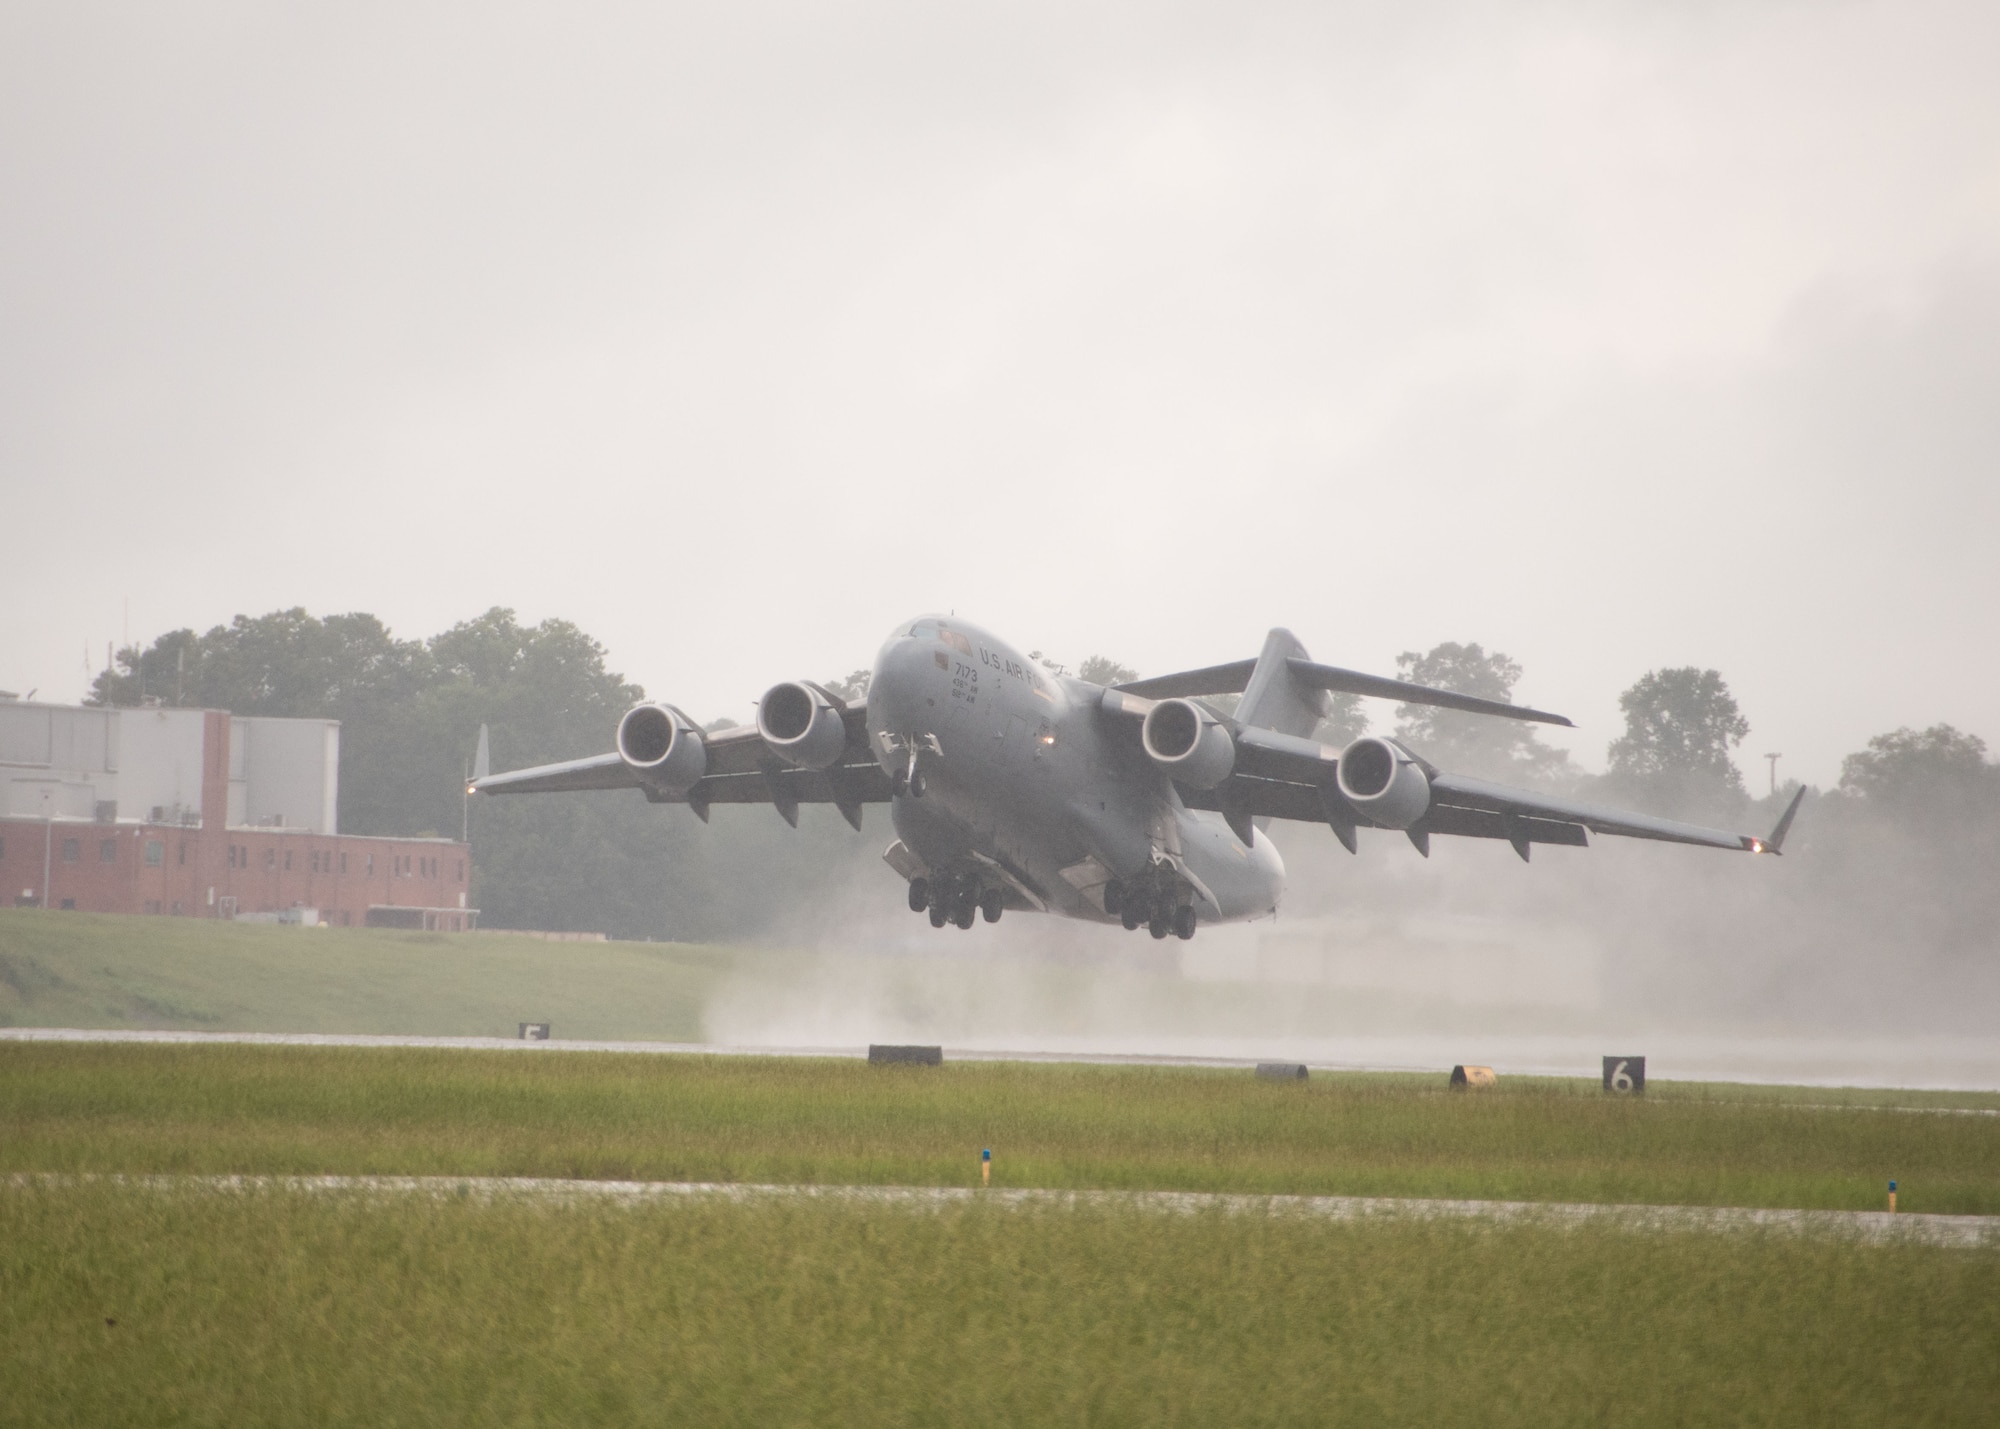 A C-17 Globemaster III takes off from the flightline at Dobbins Air Reserve Base, Ga. on Aug. 10, 2017. The C-17 is from Dover Air Force Base, Del. (U.S. Air Force photo/Staff Sgt. Andrew Park)